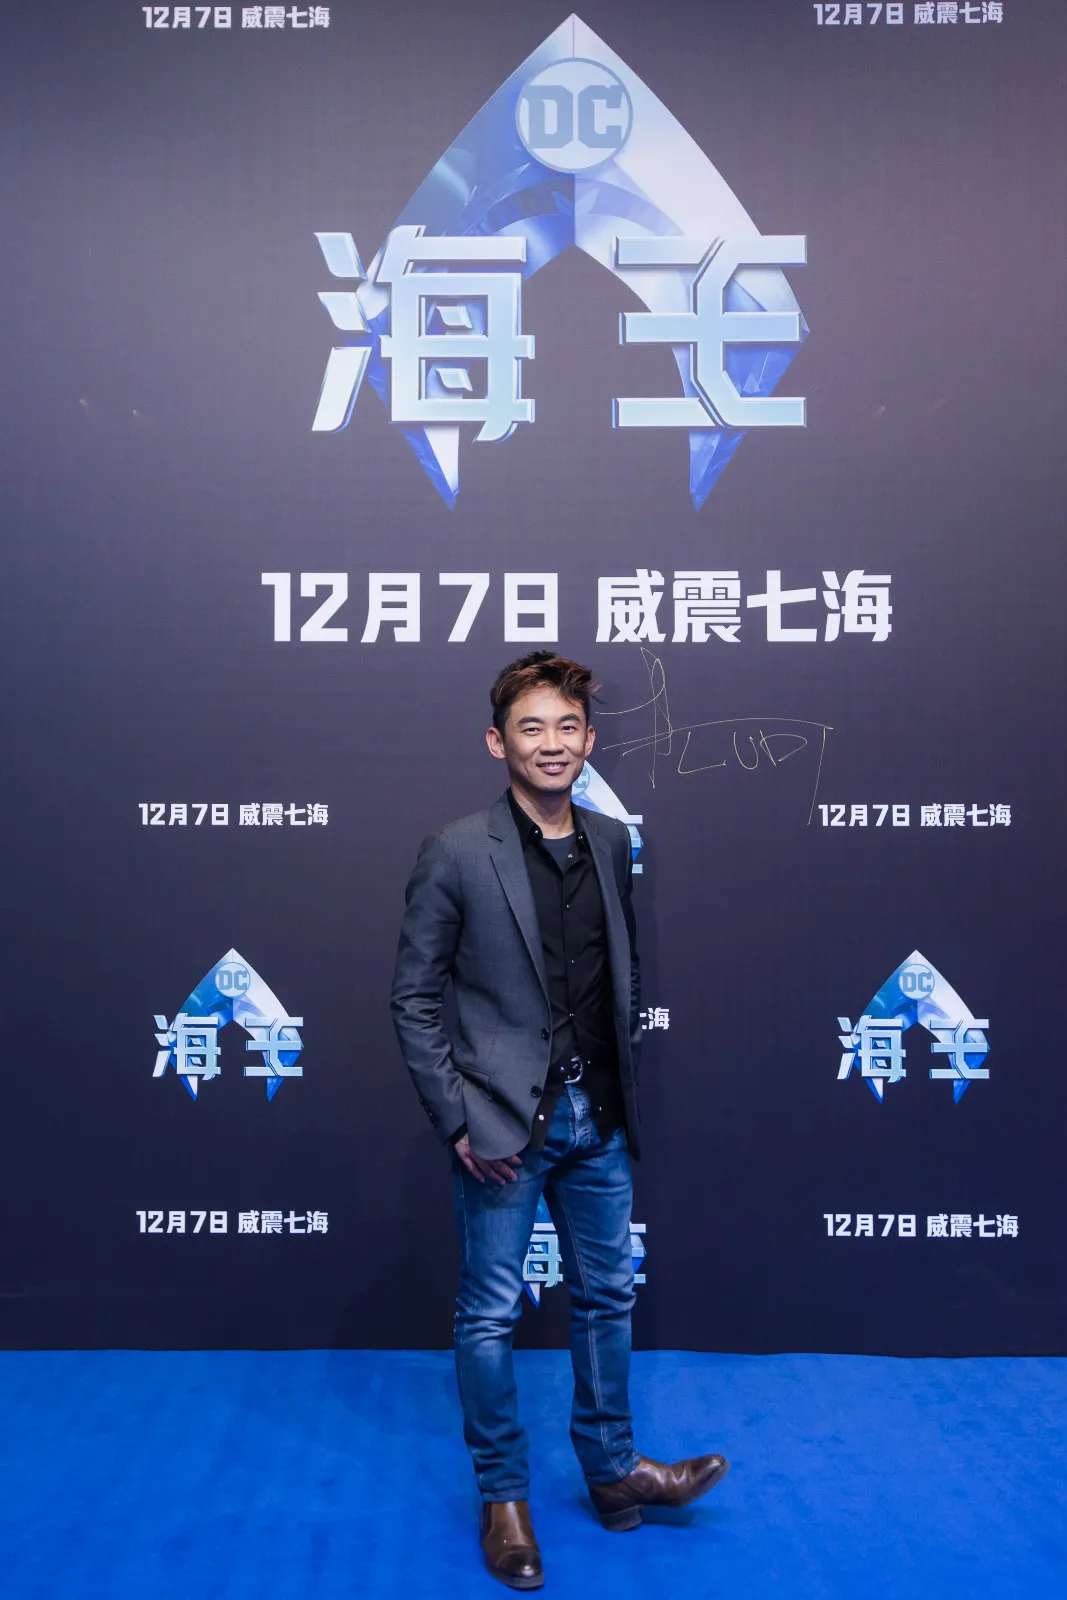 Related story Chinese ghost director James Wan goes home with shock. JPG